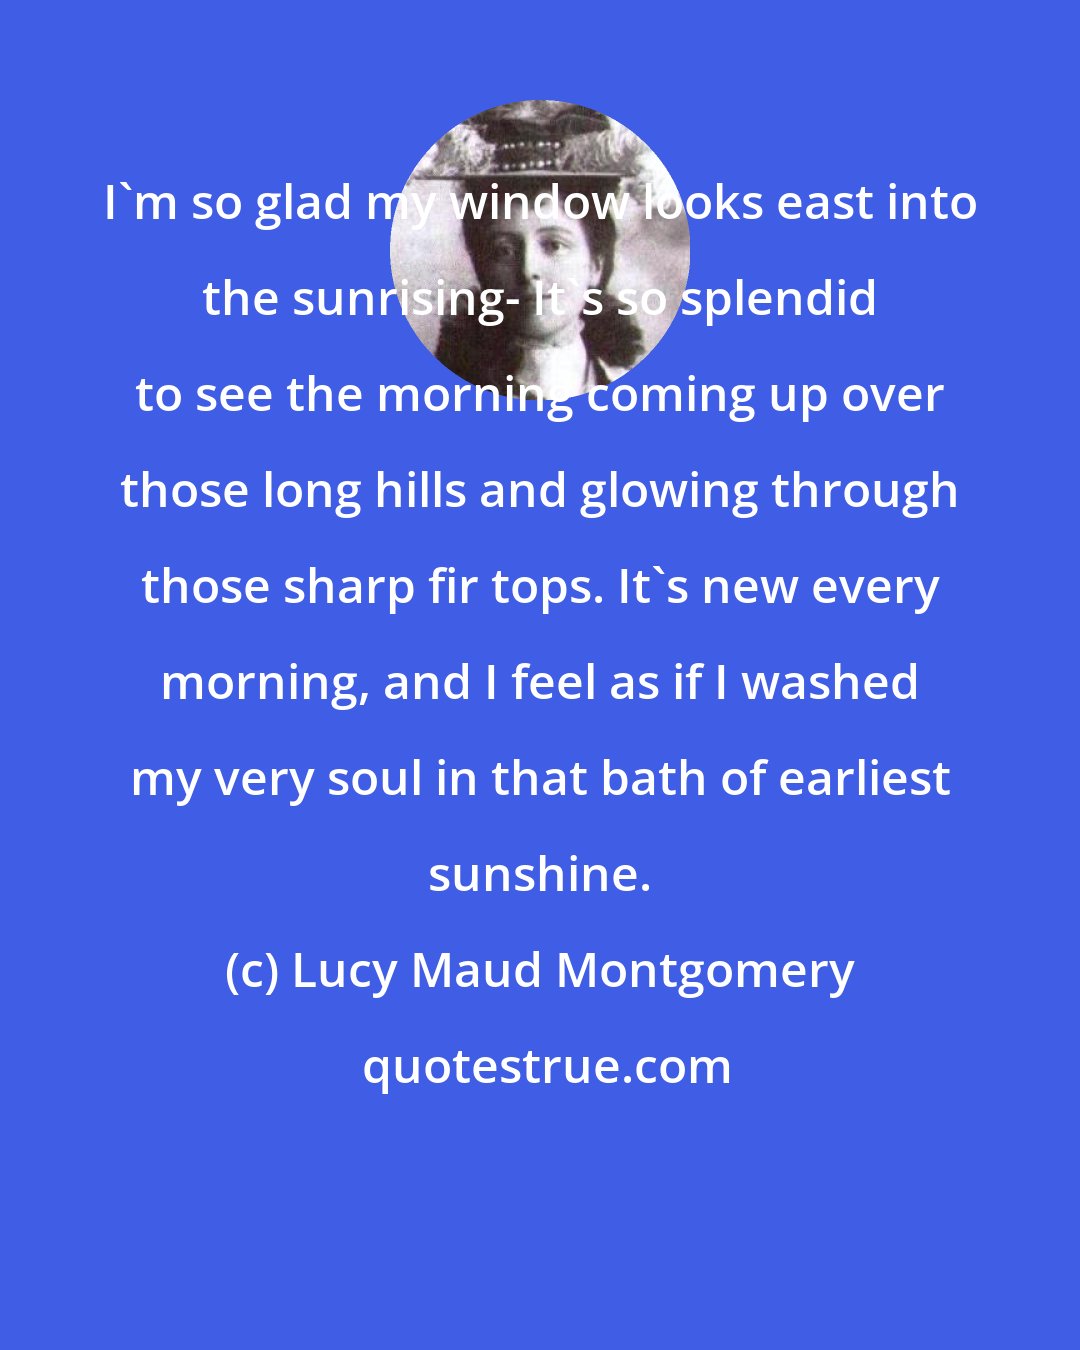 Lucy Maud Montgomery: I'm so glad my window looks east into the sunrising- It's so splendid to see the morning coming up over those long hills and glowing through those sharp fir tops. It's new every morning, and I feel as if I washed my very soul in that bath of earliest sunshine.